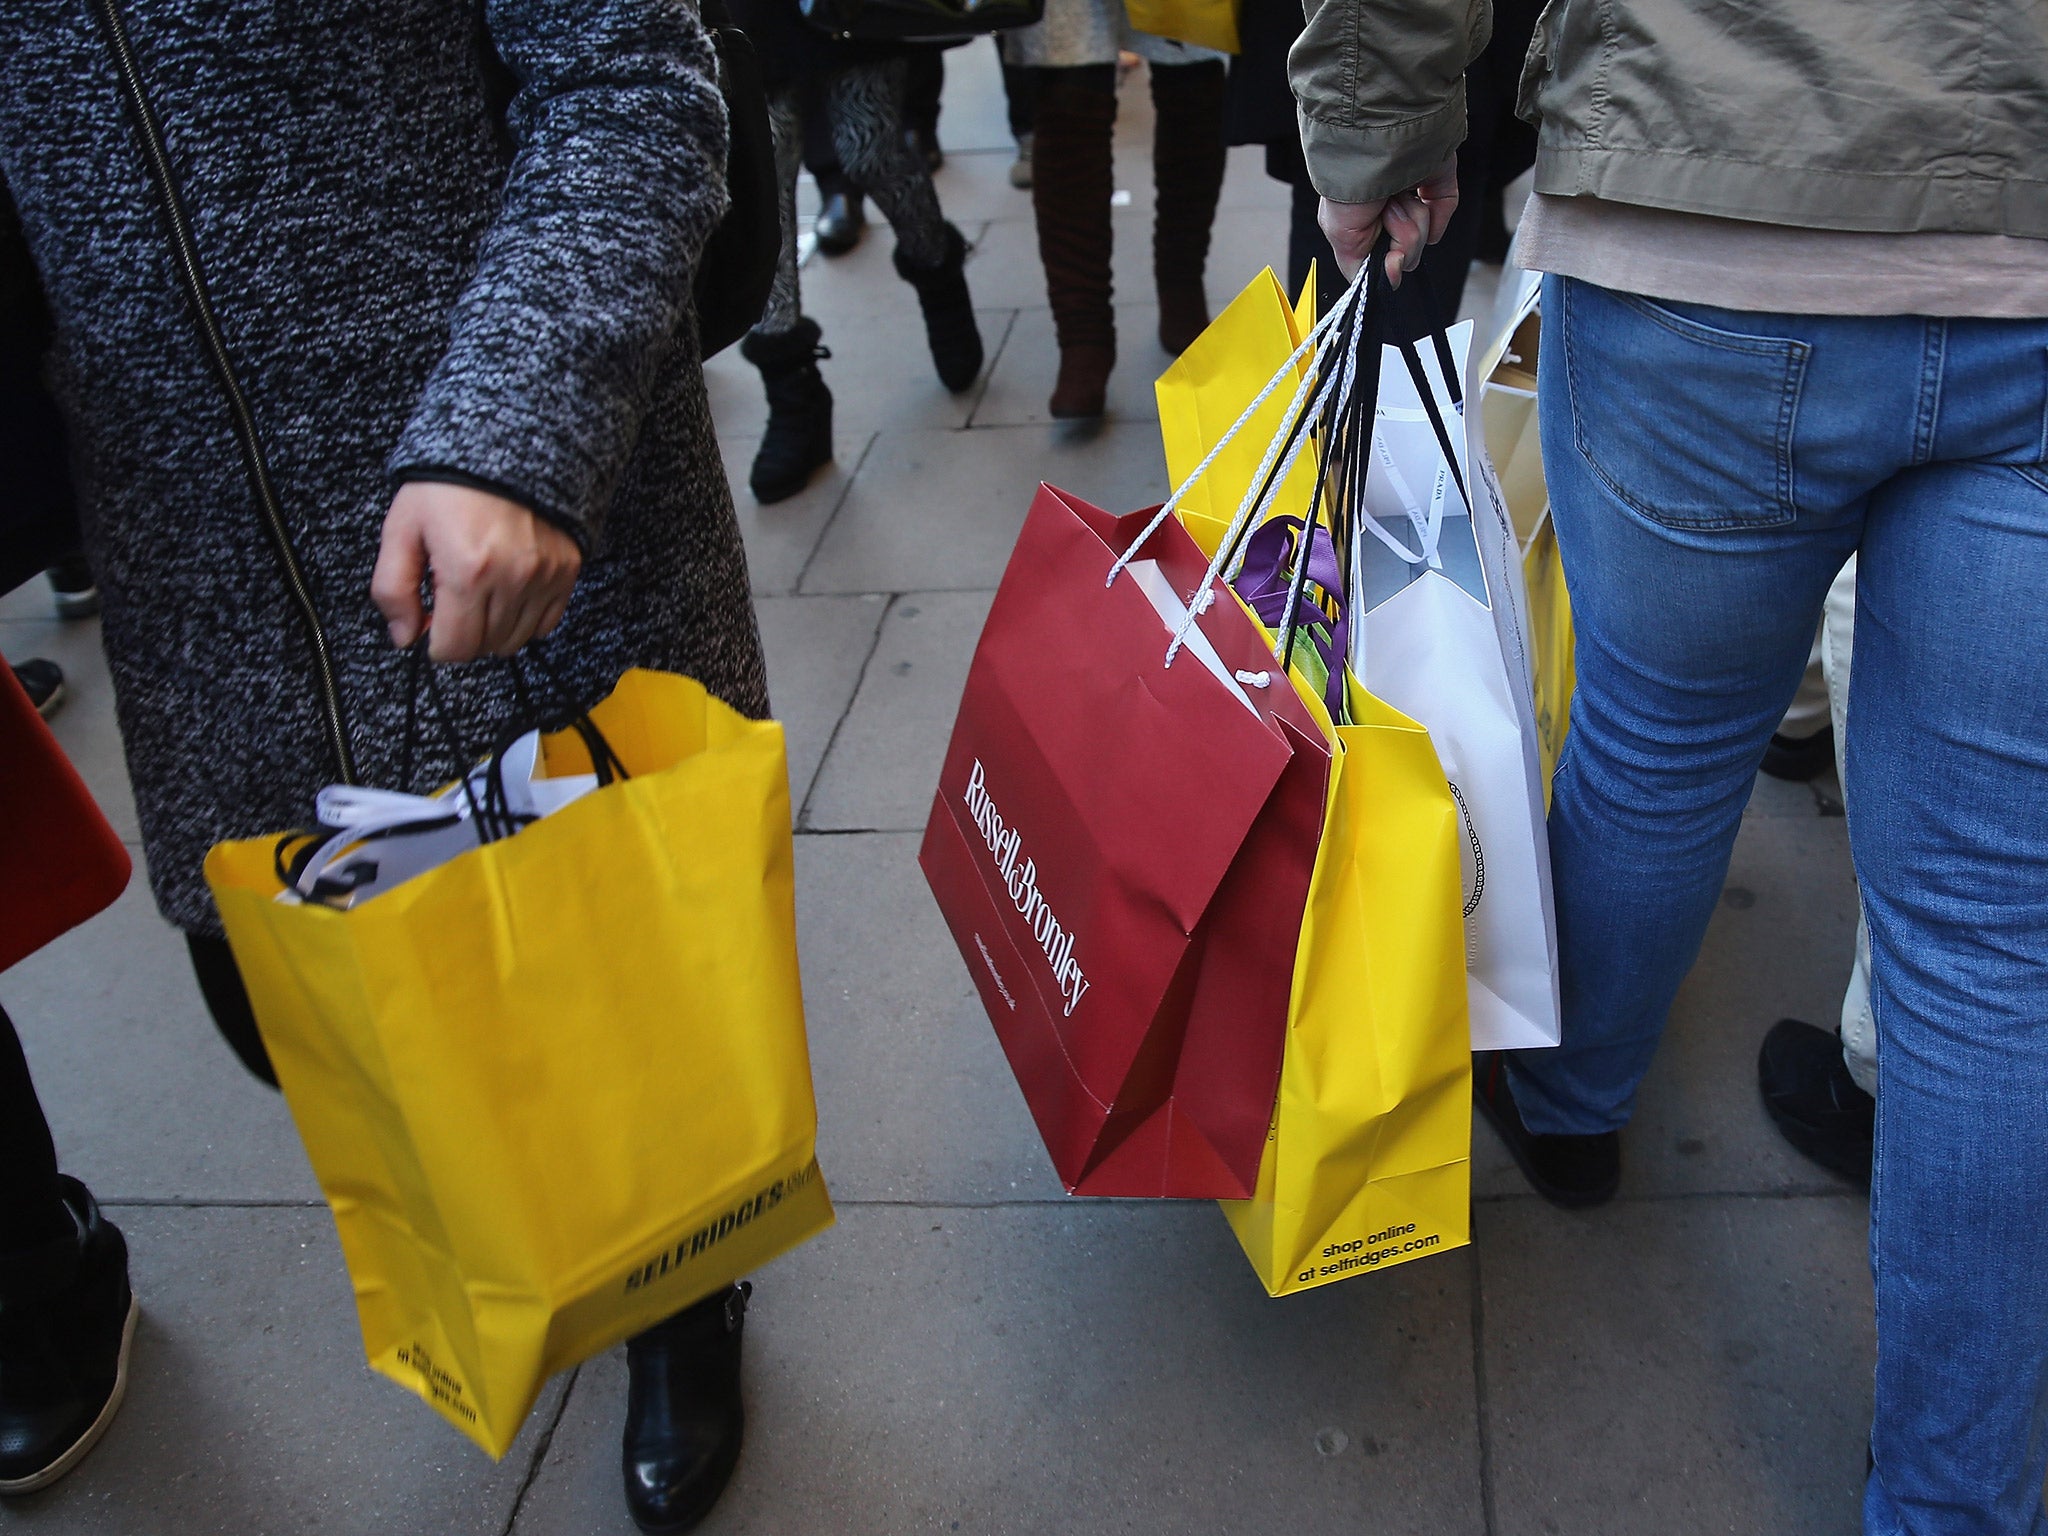 High street retailers are likely to see their profits boosted by the move